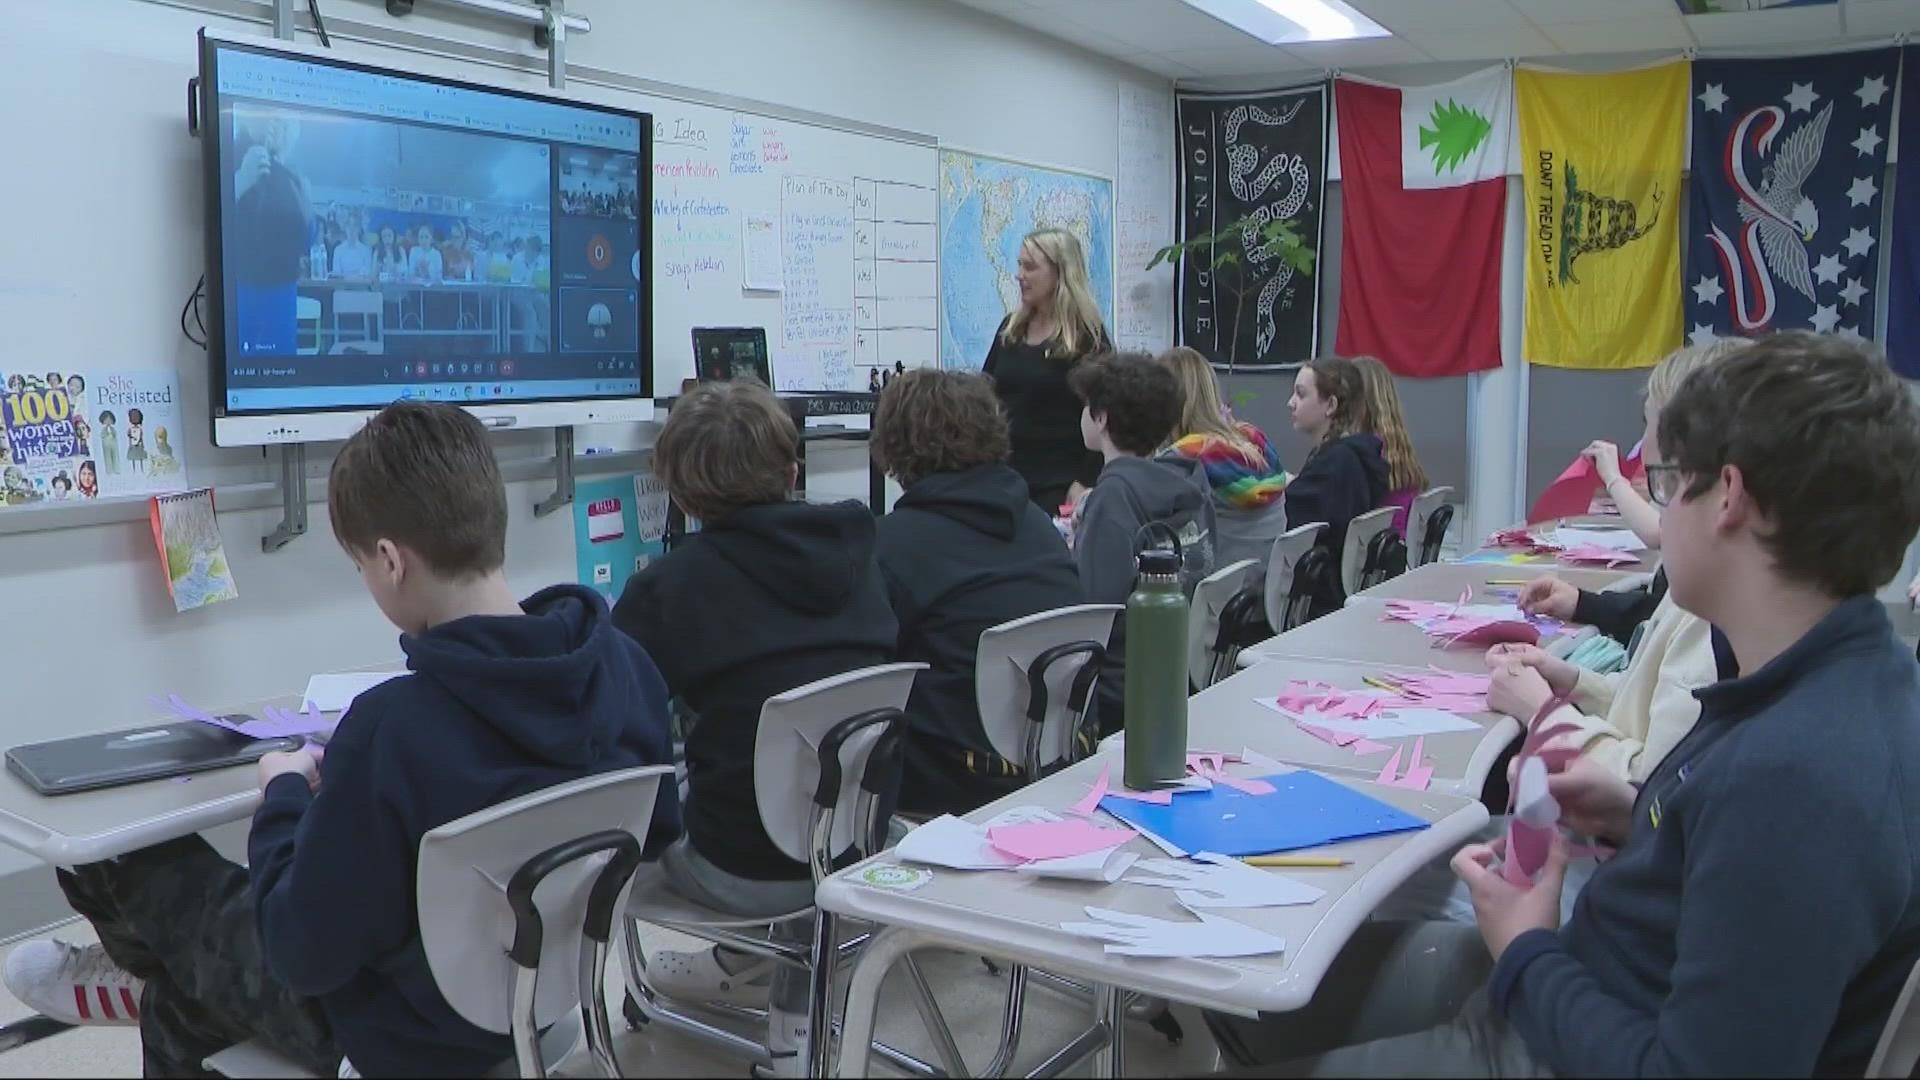 Over the past year, war has flipped Ukrainian lives upside down. How a Northeast Ohio 8th grade class has supported a Ukrainian class by staying connected digitally.